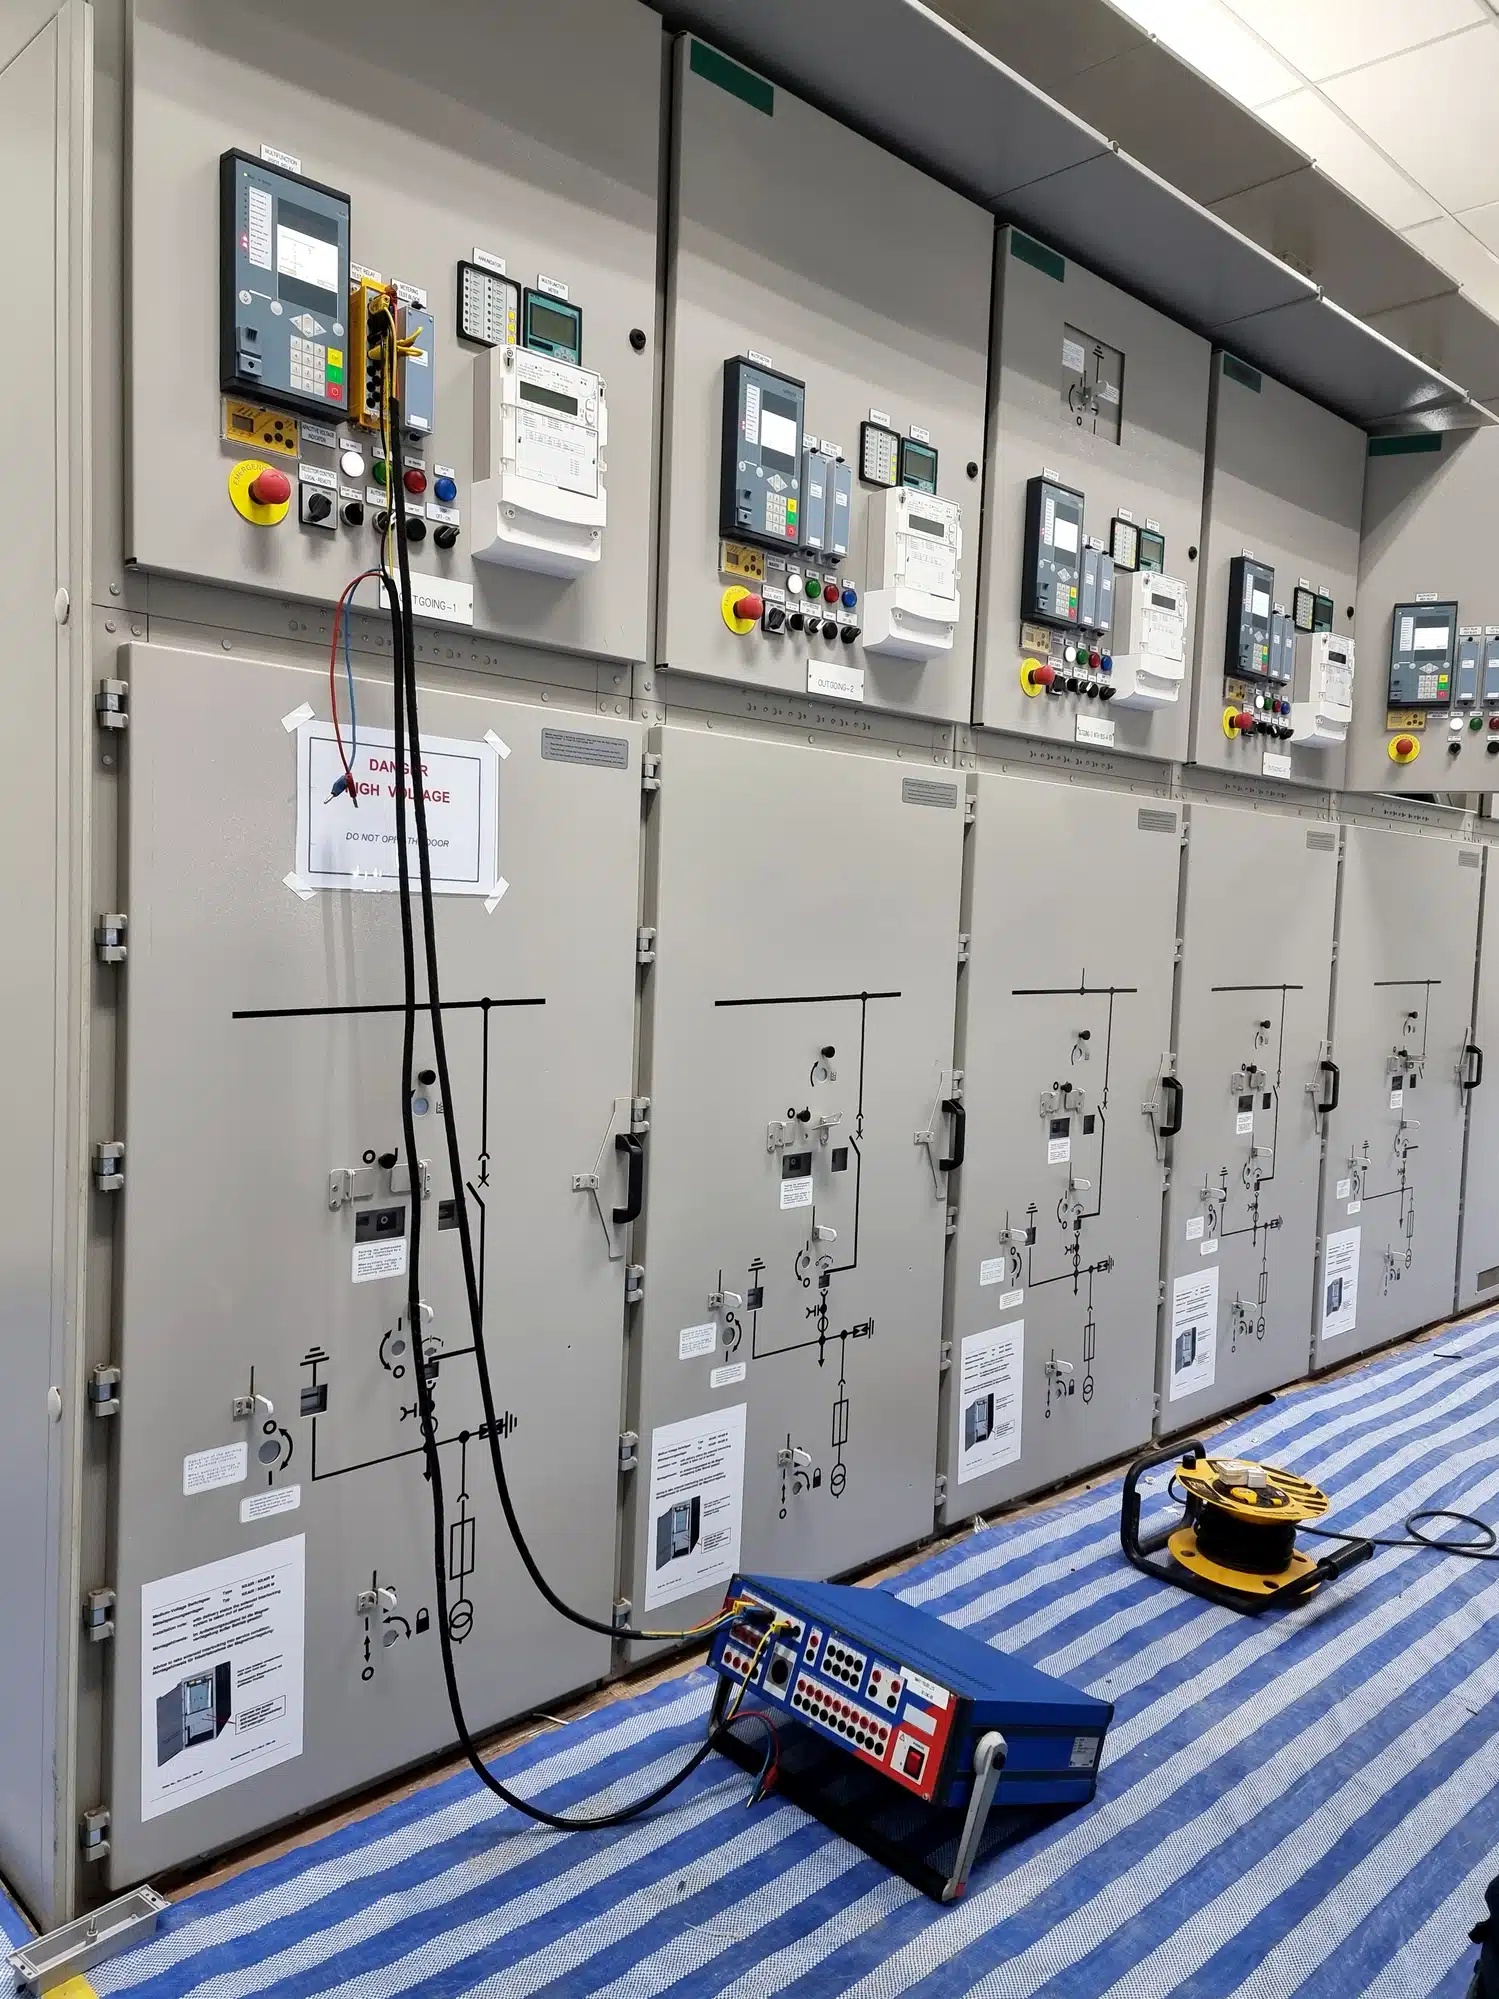 Electrical Switchgear like that which Spike Electric Controls produces being Tested or Measured.